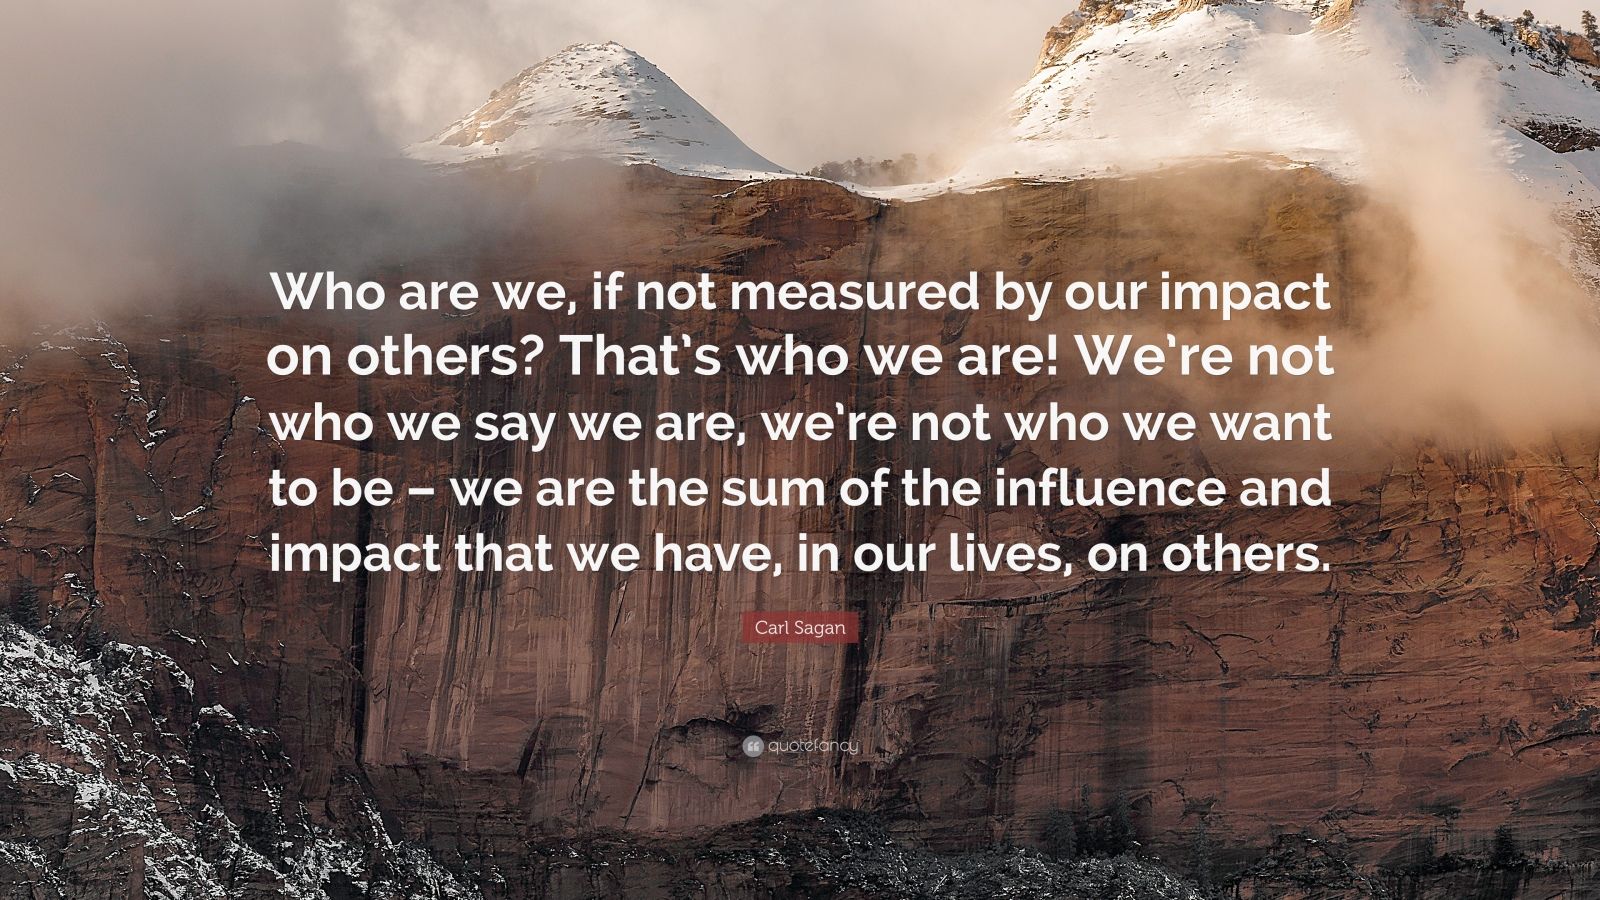 Carl Sagan Quote: “Who are we, if not measured by our impact on others